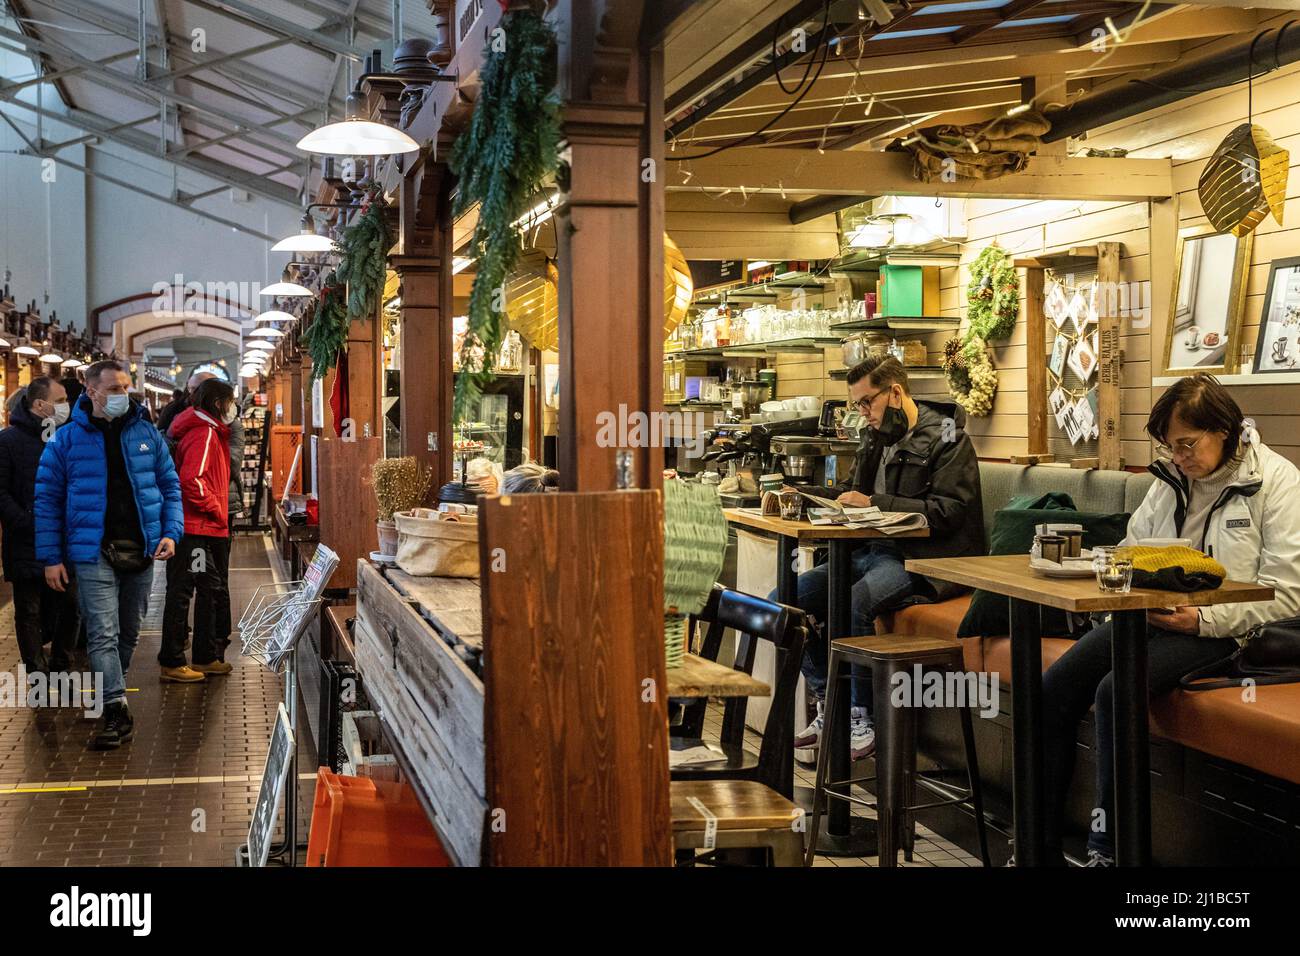 CAFE AND TRADITIONAL SHOPS IN THE HISTORIC 19TH CENTURY VANHA KAUPPAHALLI COVERED MARKET, HELSINKI, FINLAND, EUROPE Stock Photo